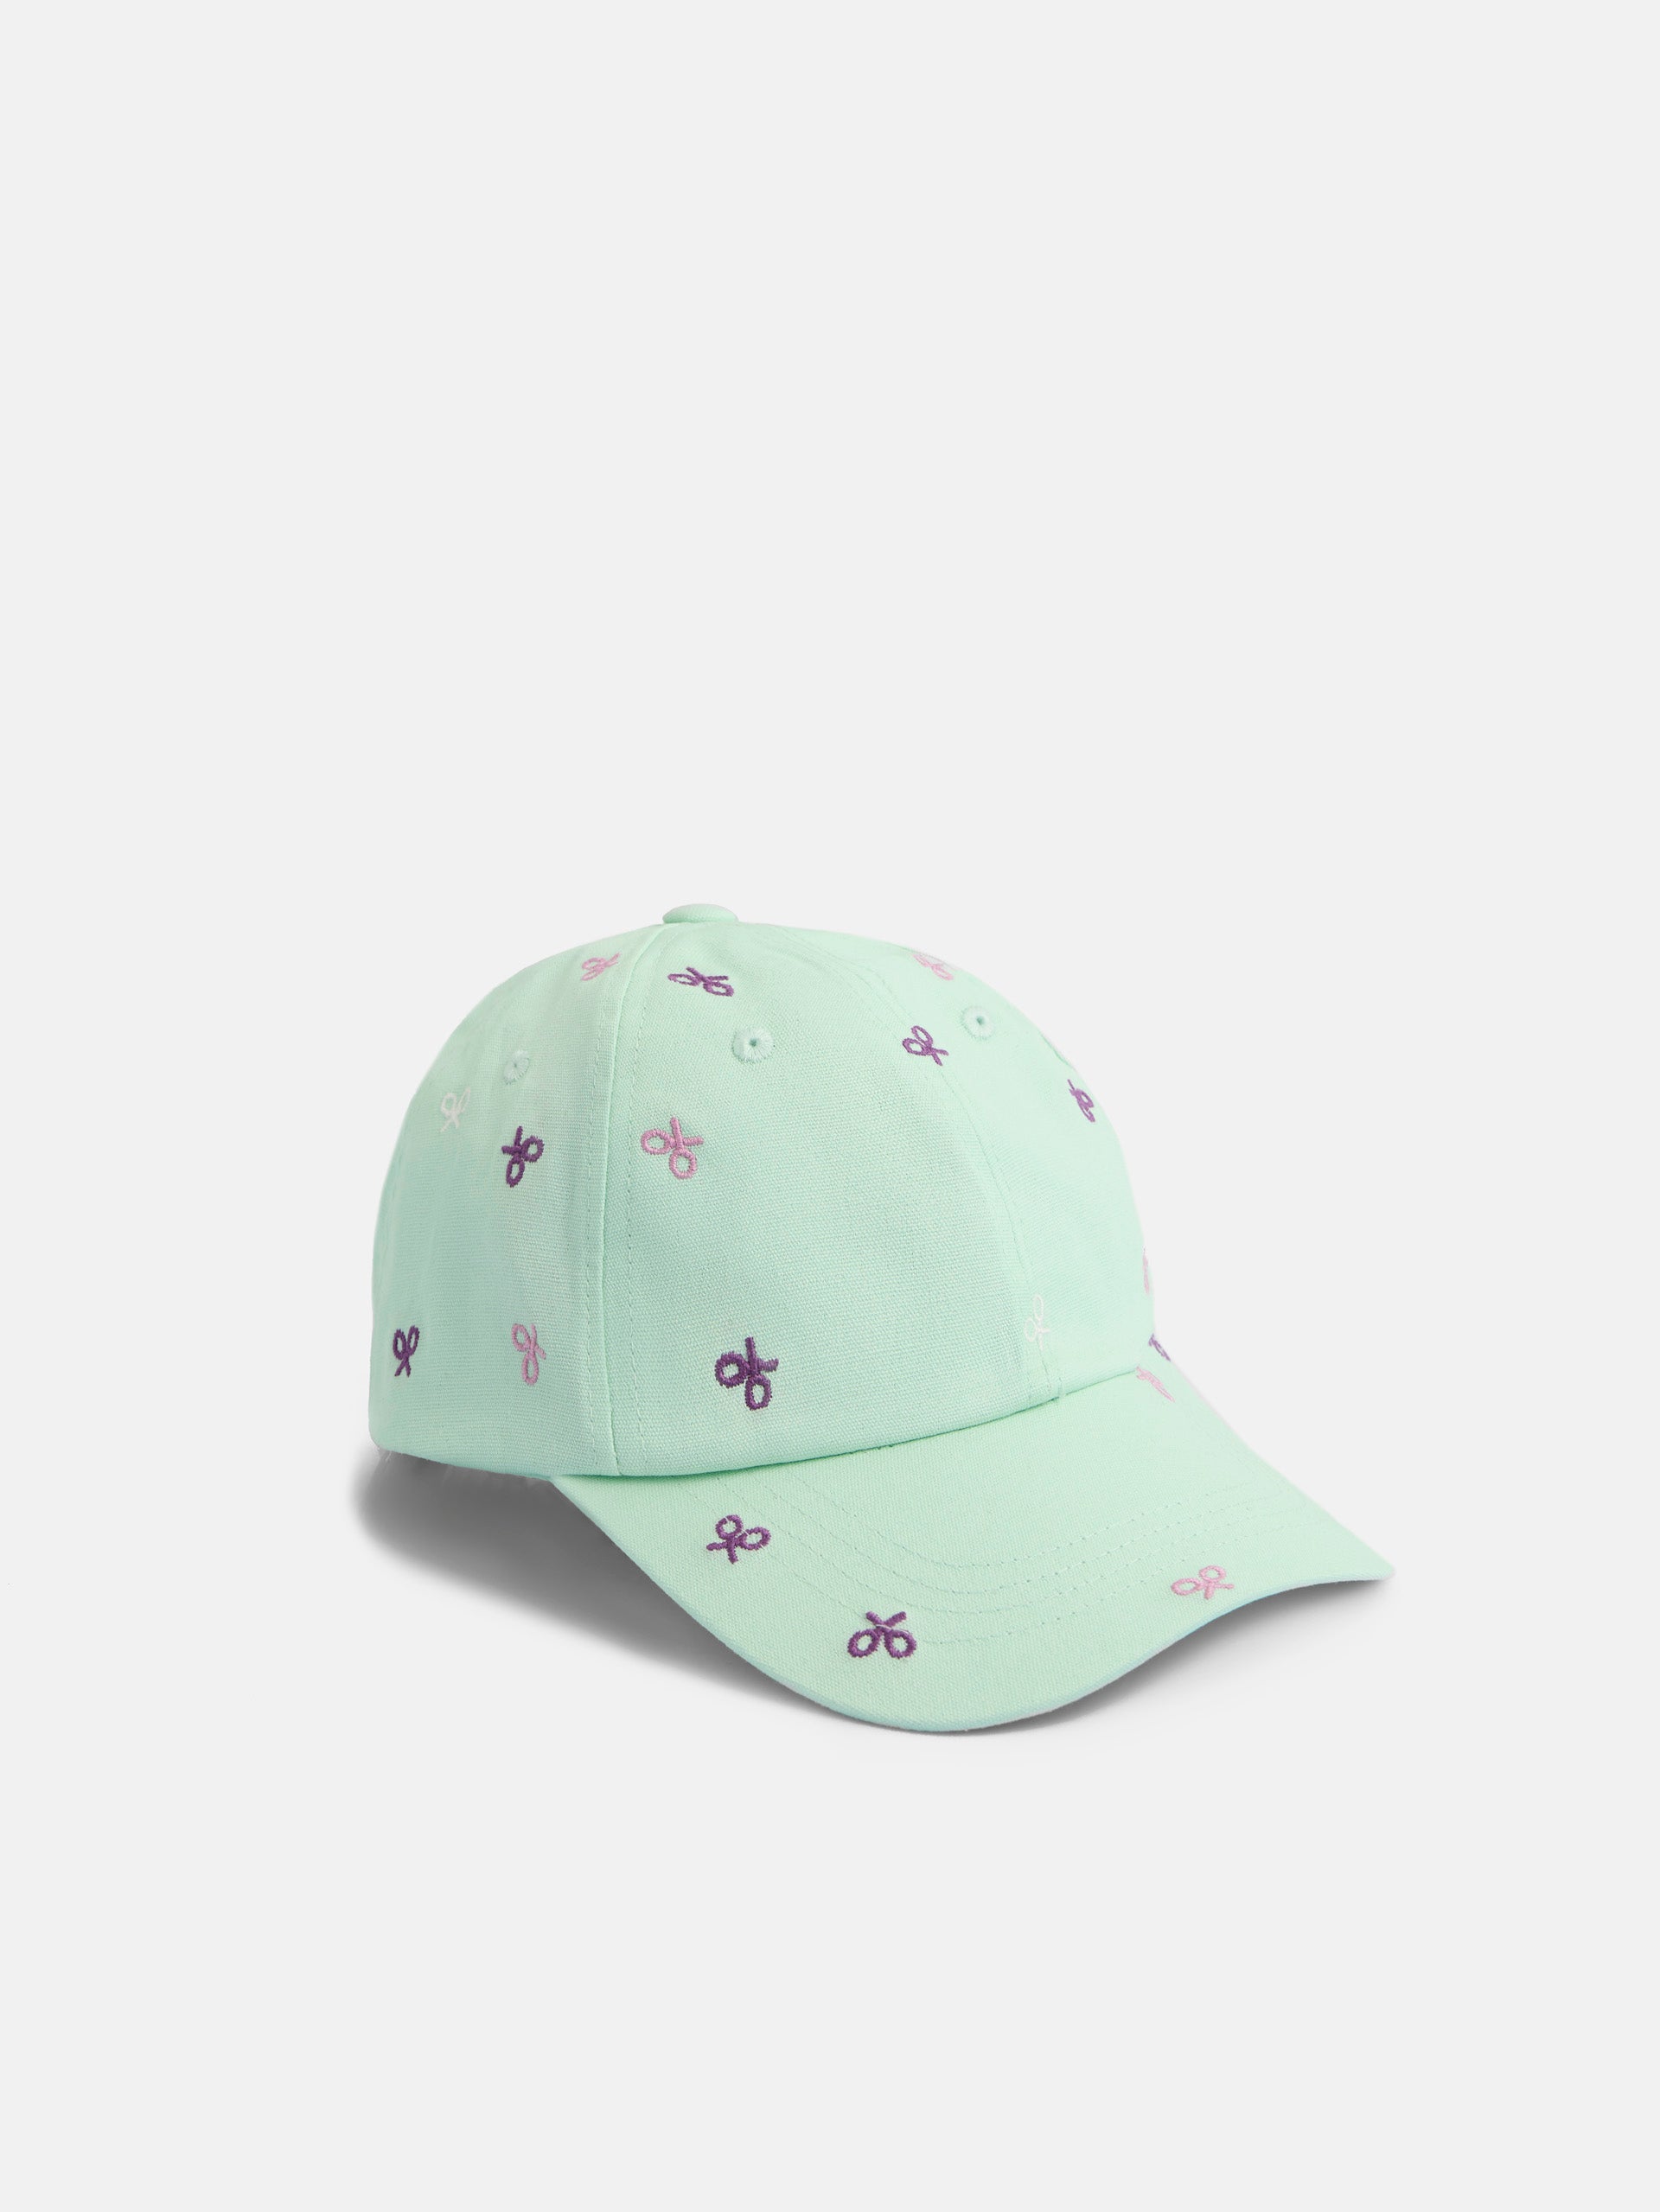 Turquoise embroidered rackets cap